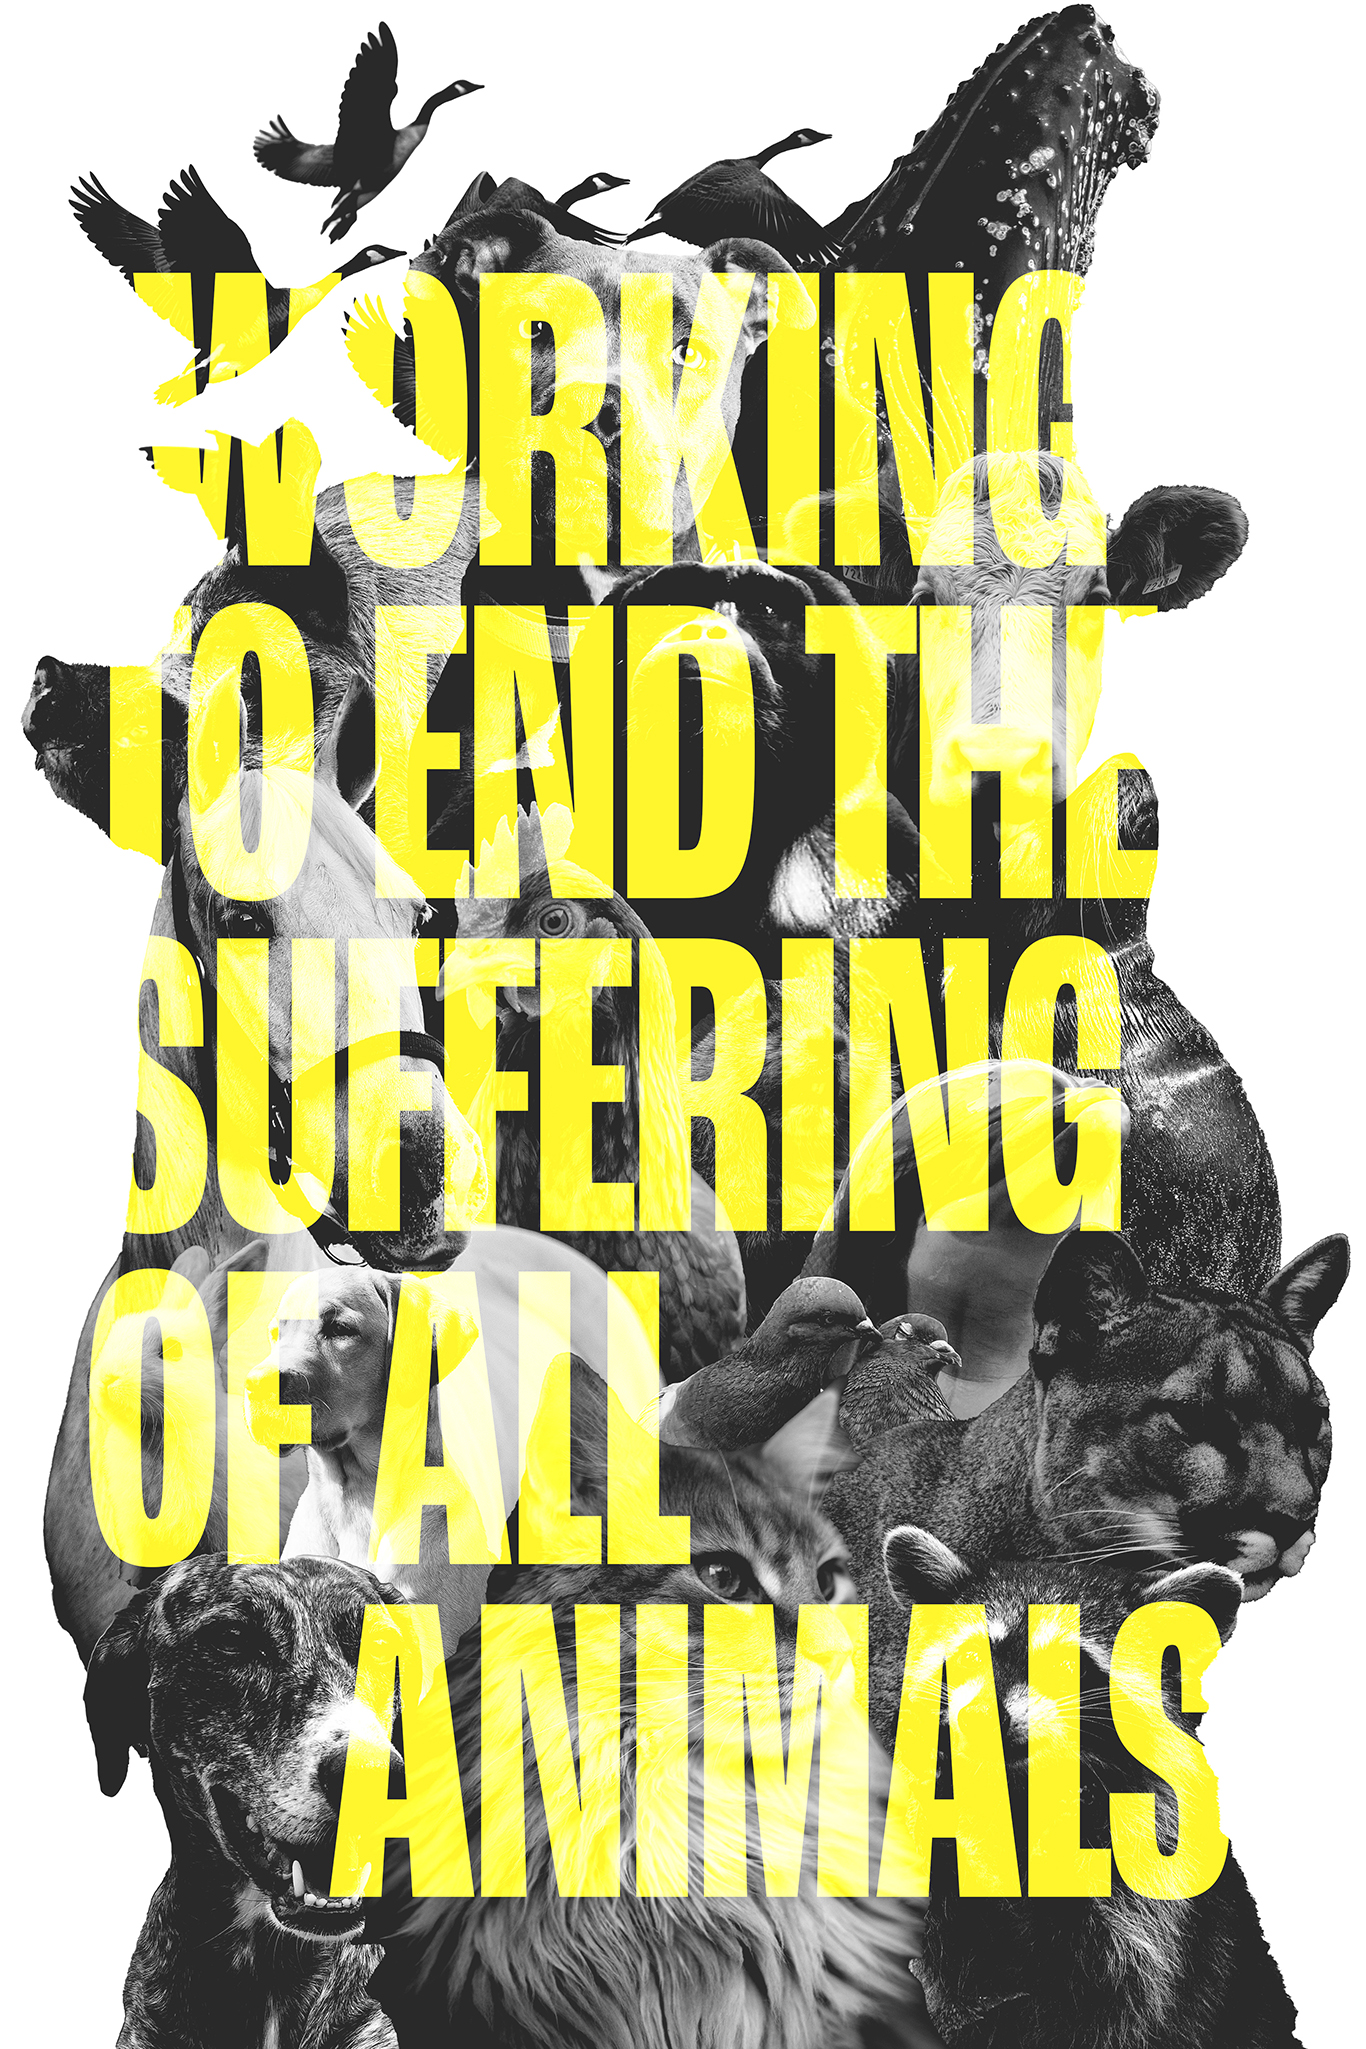 A white poster with a black and white collage of images of different animals with yellow overlay text that reads “Working to end the suffering of all animals.”.